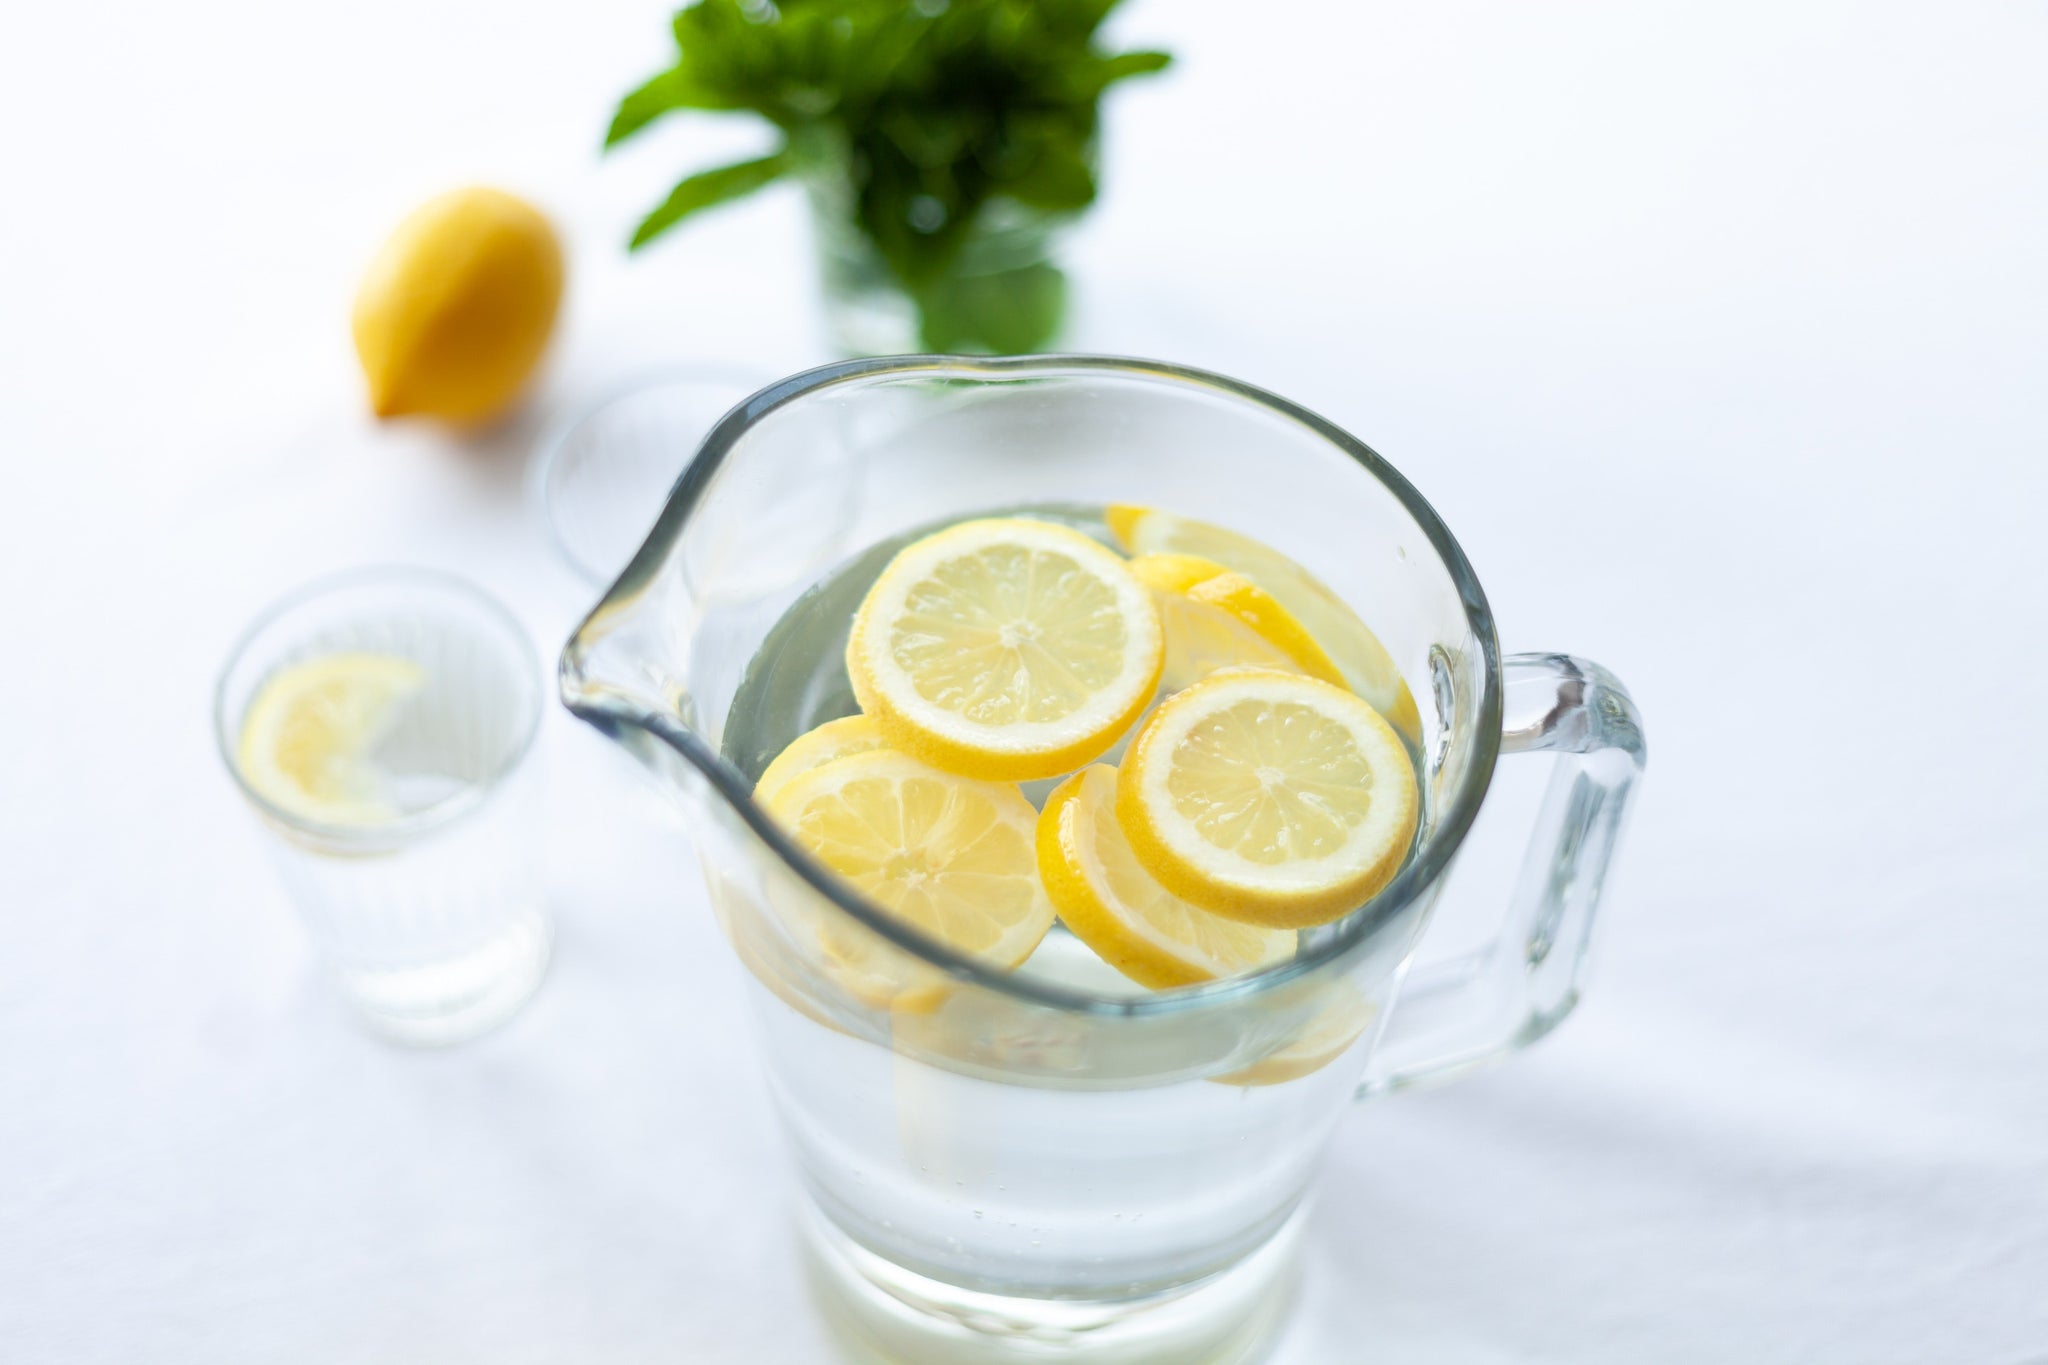 A glass of water with lemon